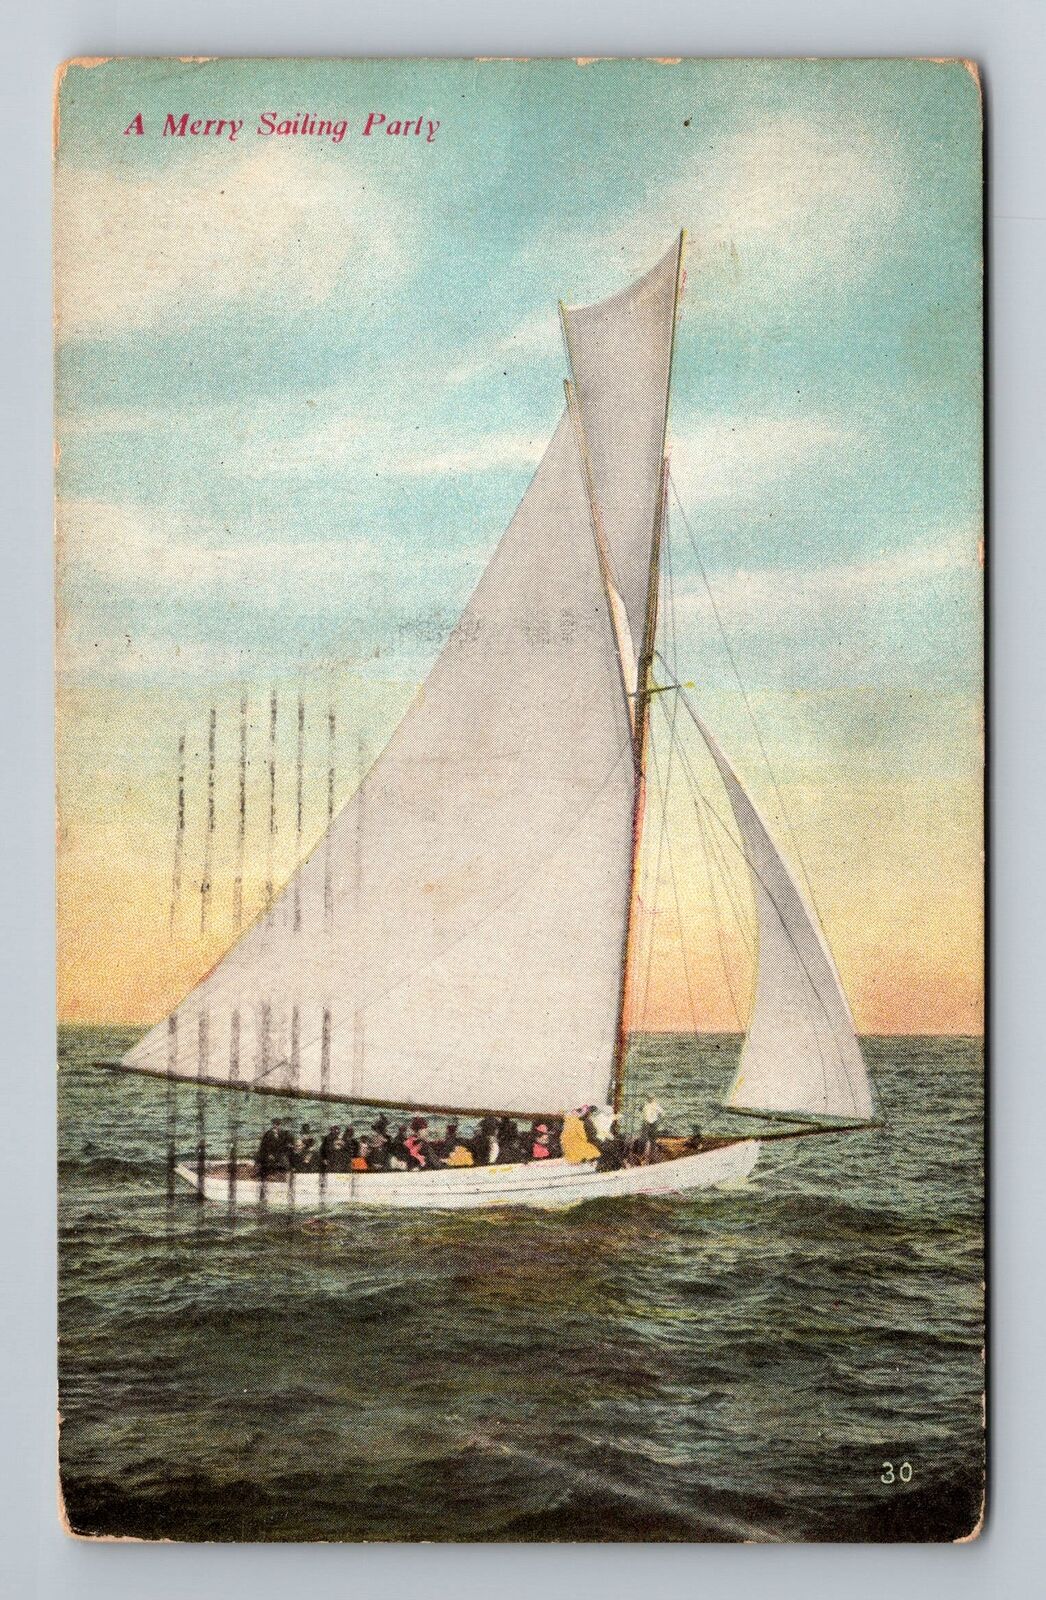 NJ-New Jersey, A Merry Sailing Party, Scenic, c1909, Vintage Postcard